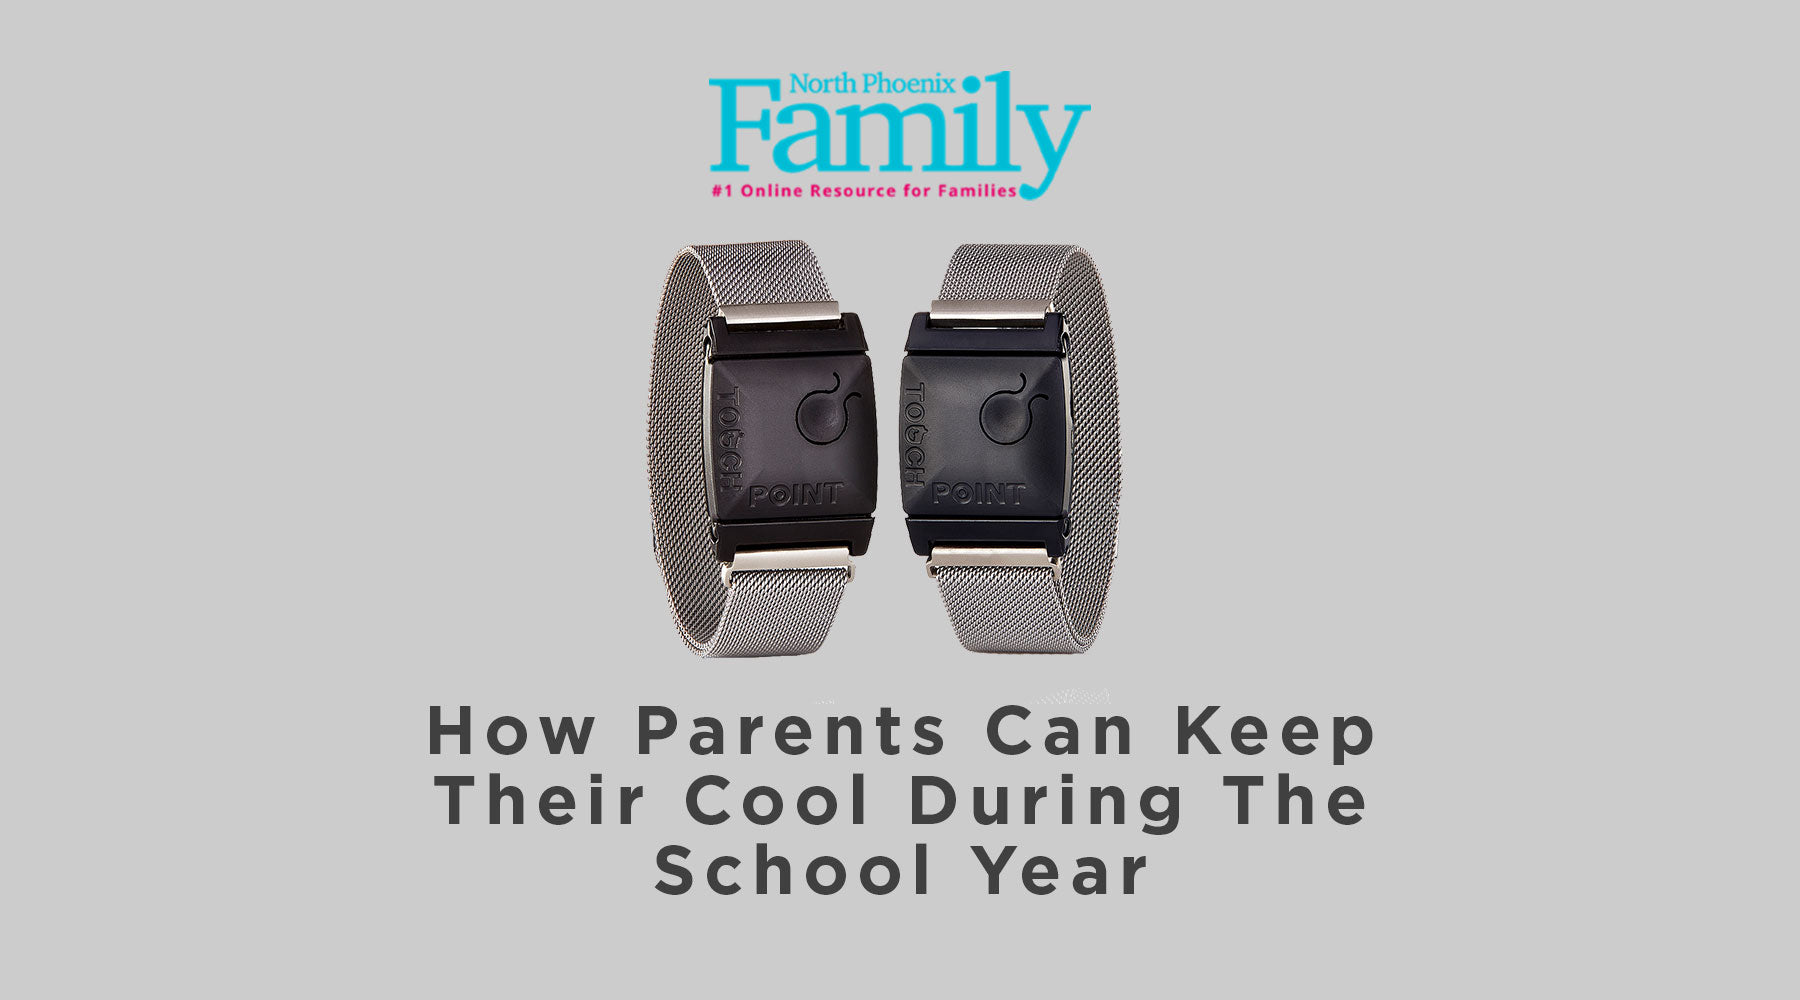 North Phoenix Family Magazine - How Parents Can Keep Their Cool During the School Year